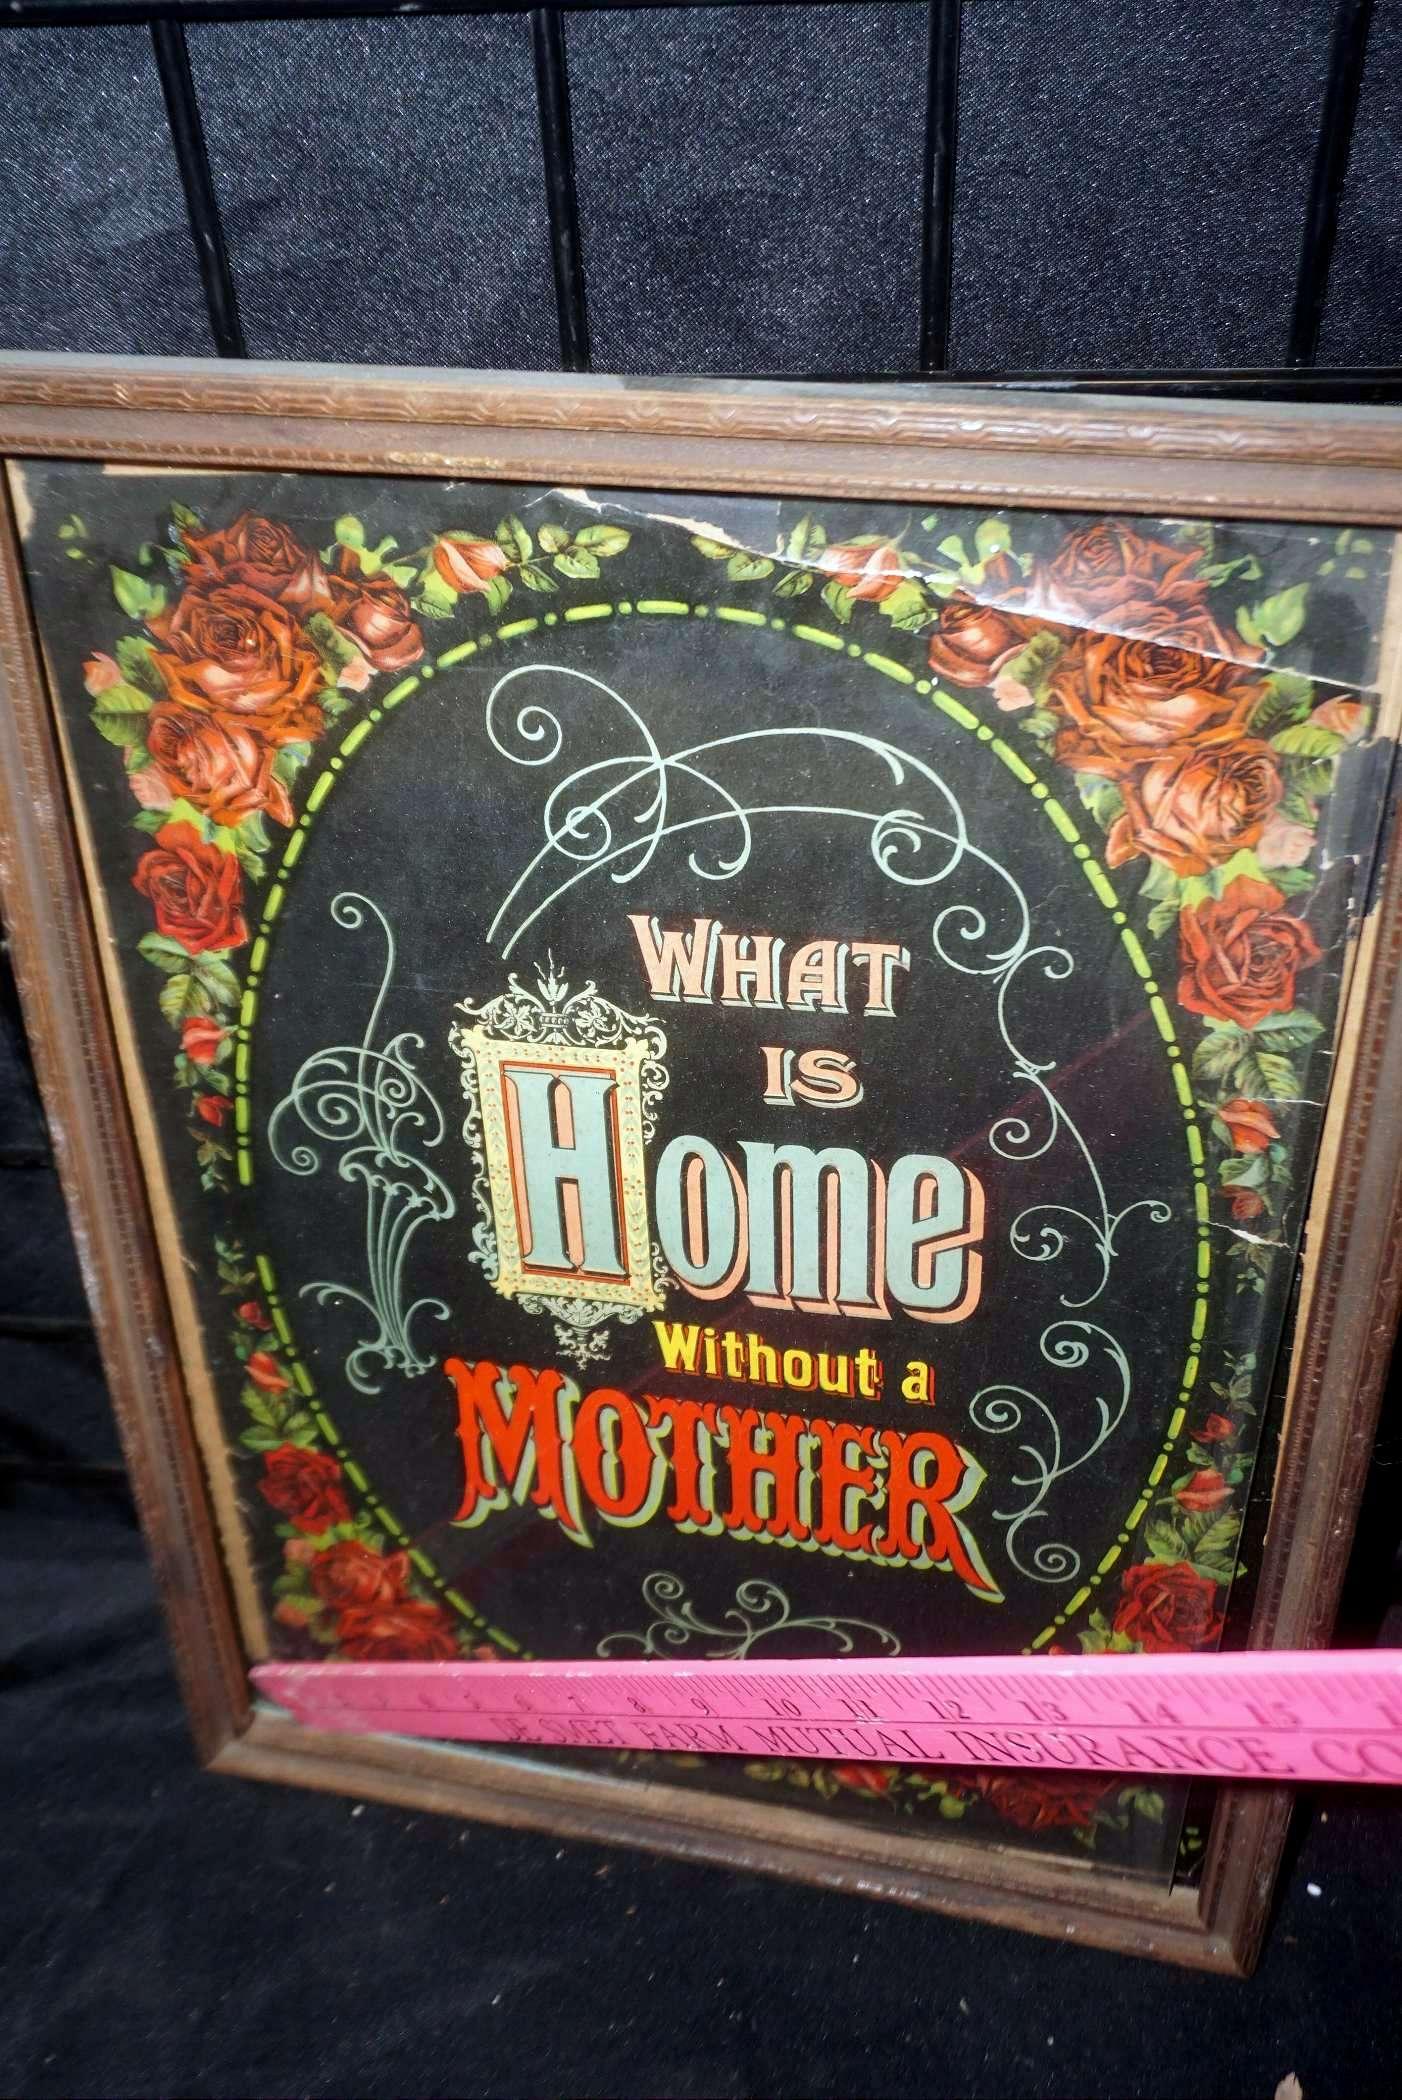 2 Framed Pictures - "What is Home Without a Father" & "What is Home Without a Mother"